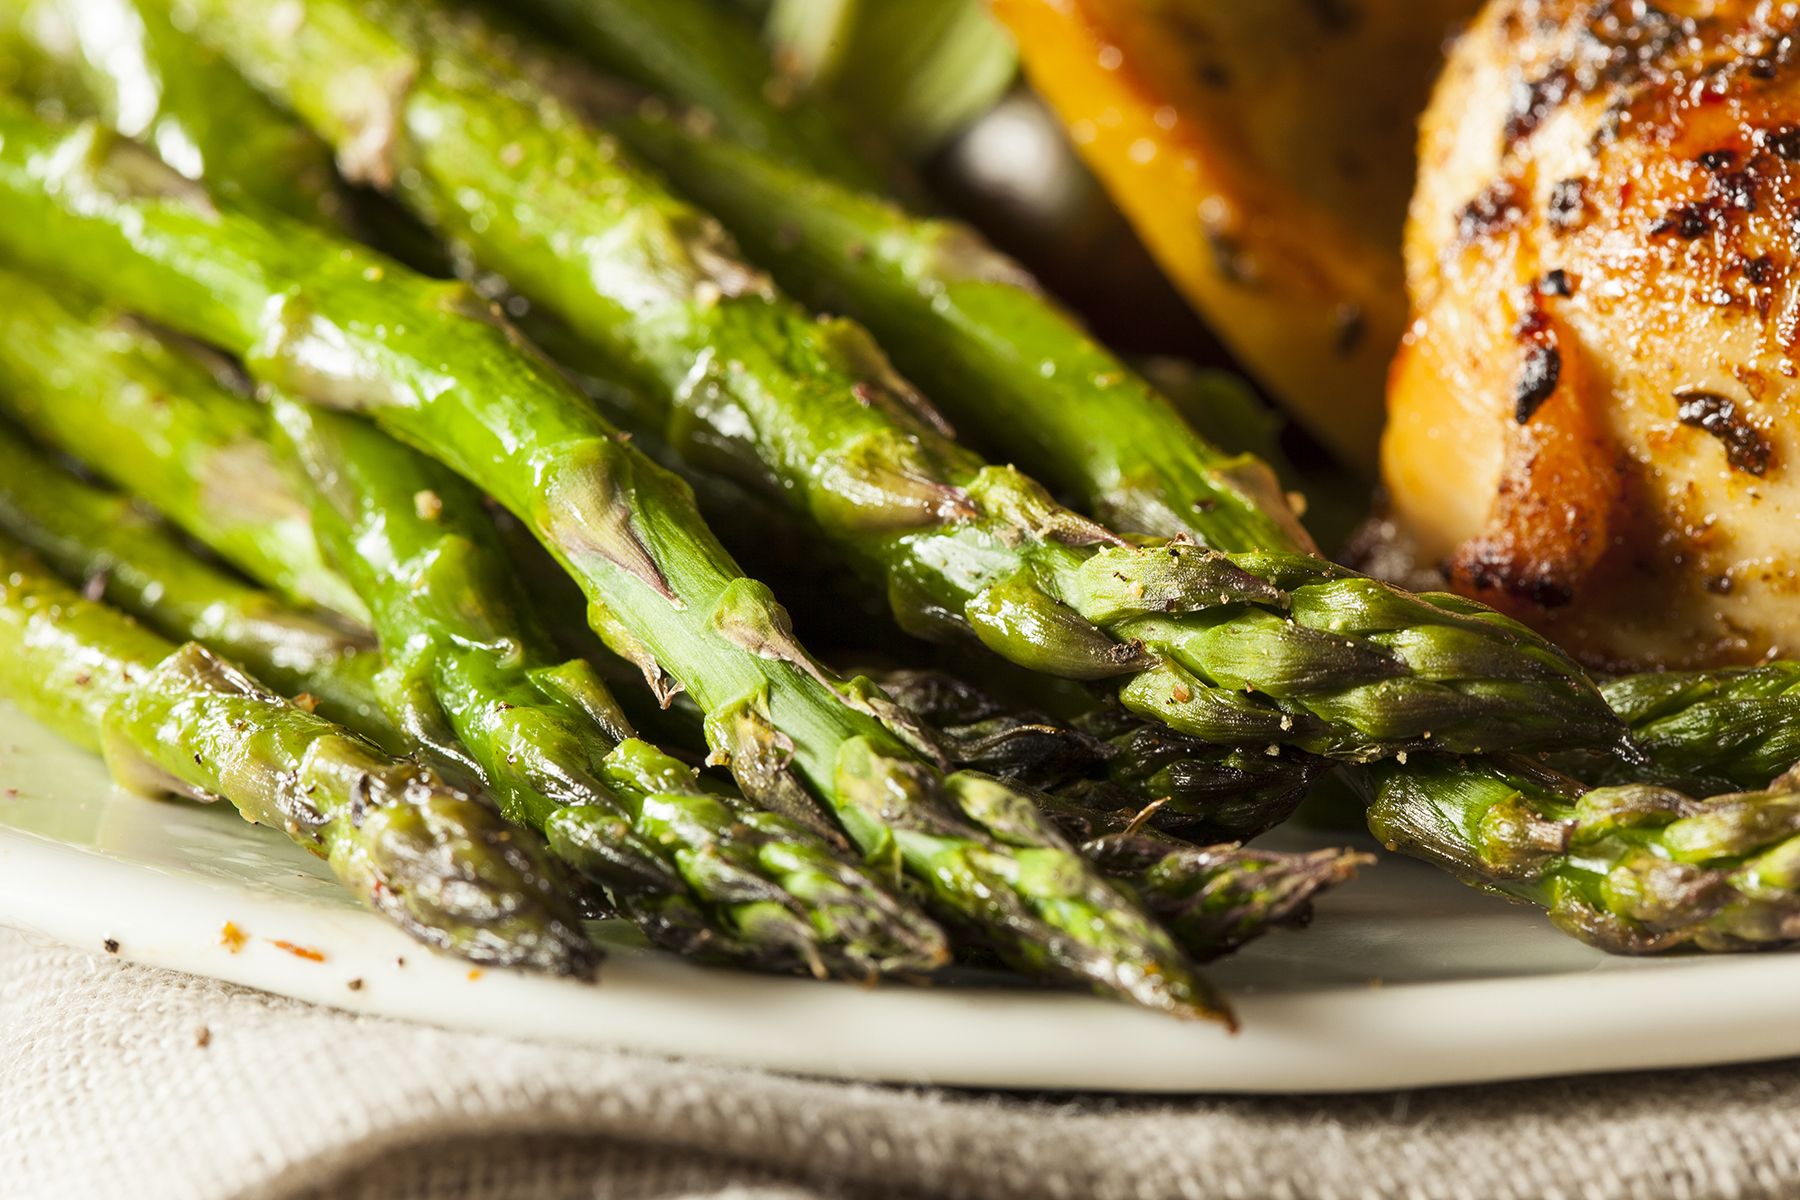 Homemade Healthy Baked Asparagus with bone doctors premium spice blend